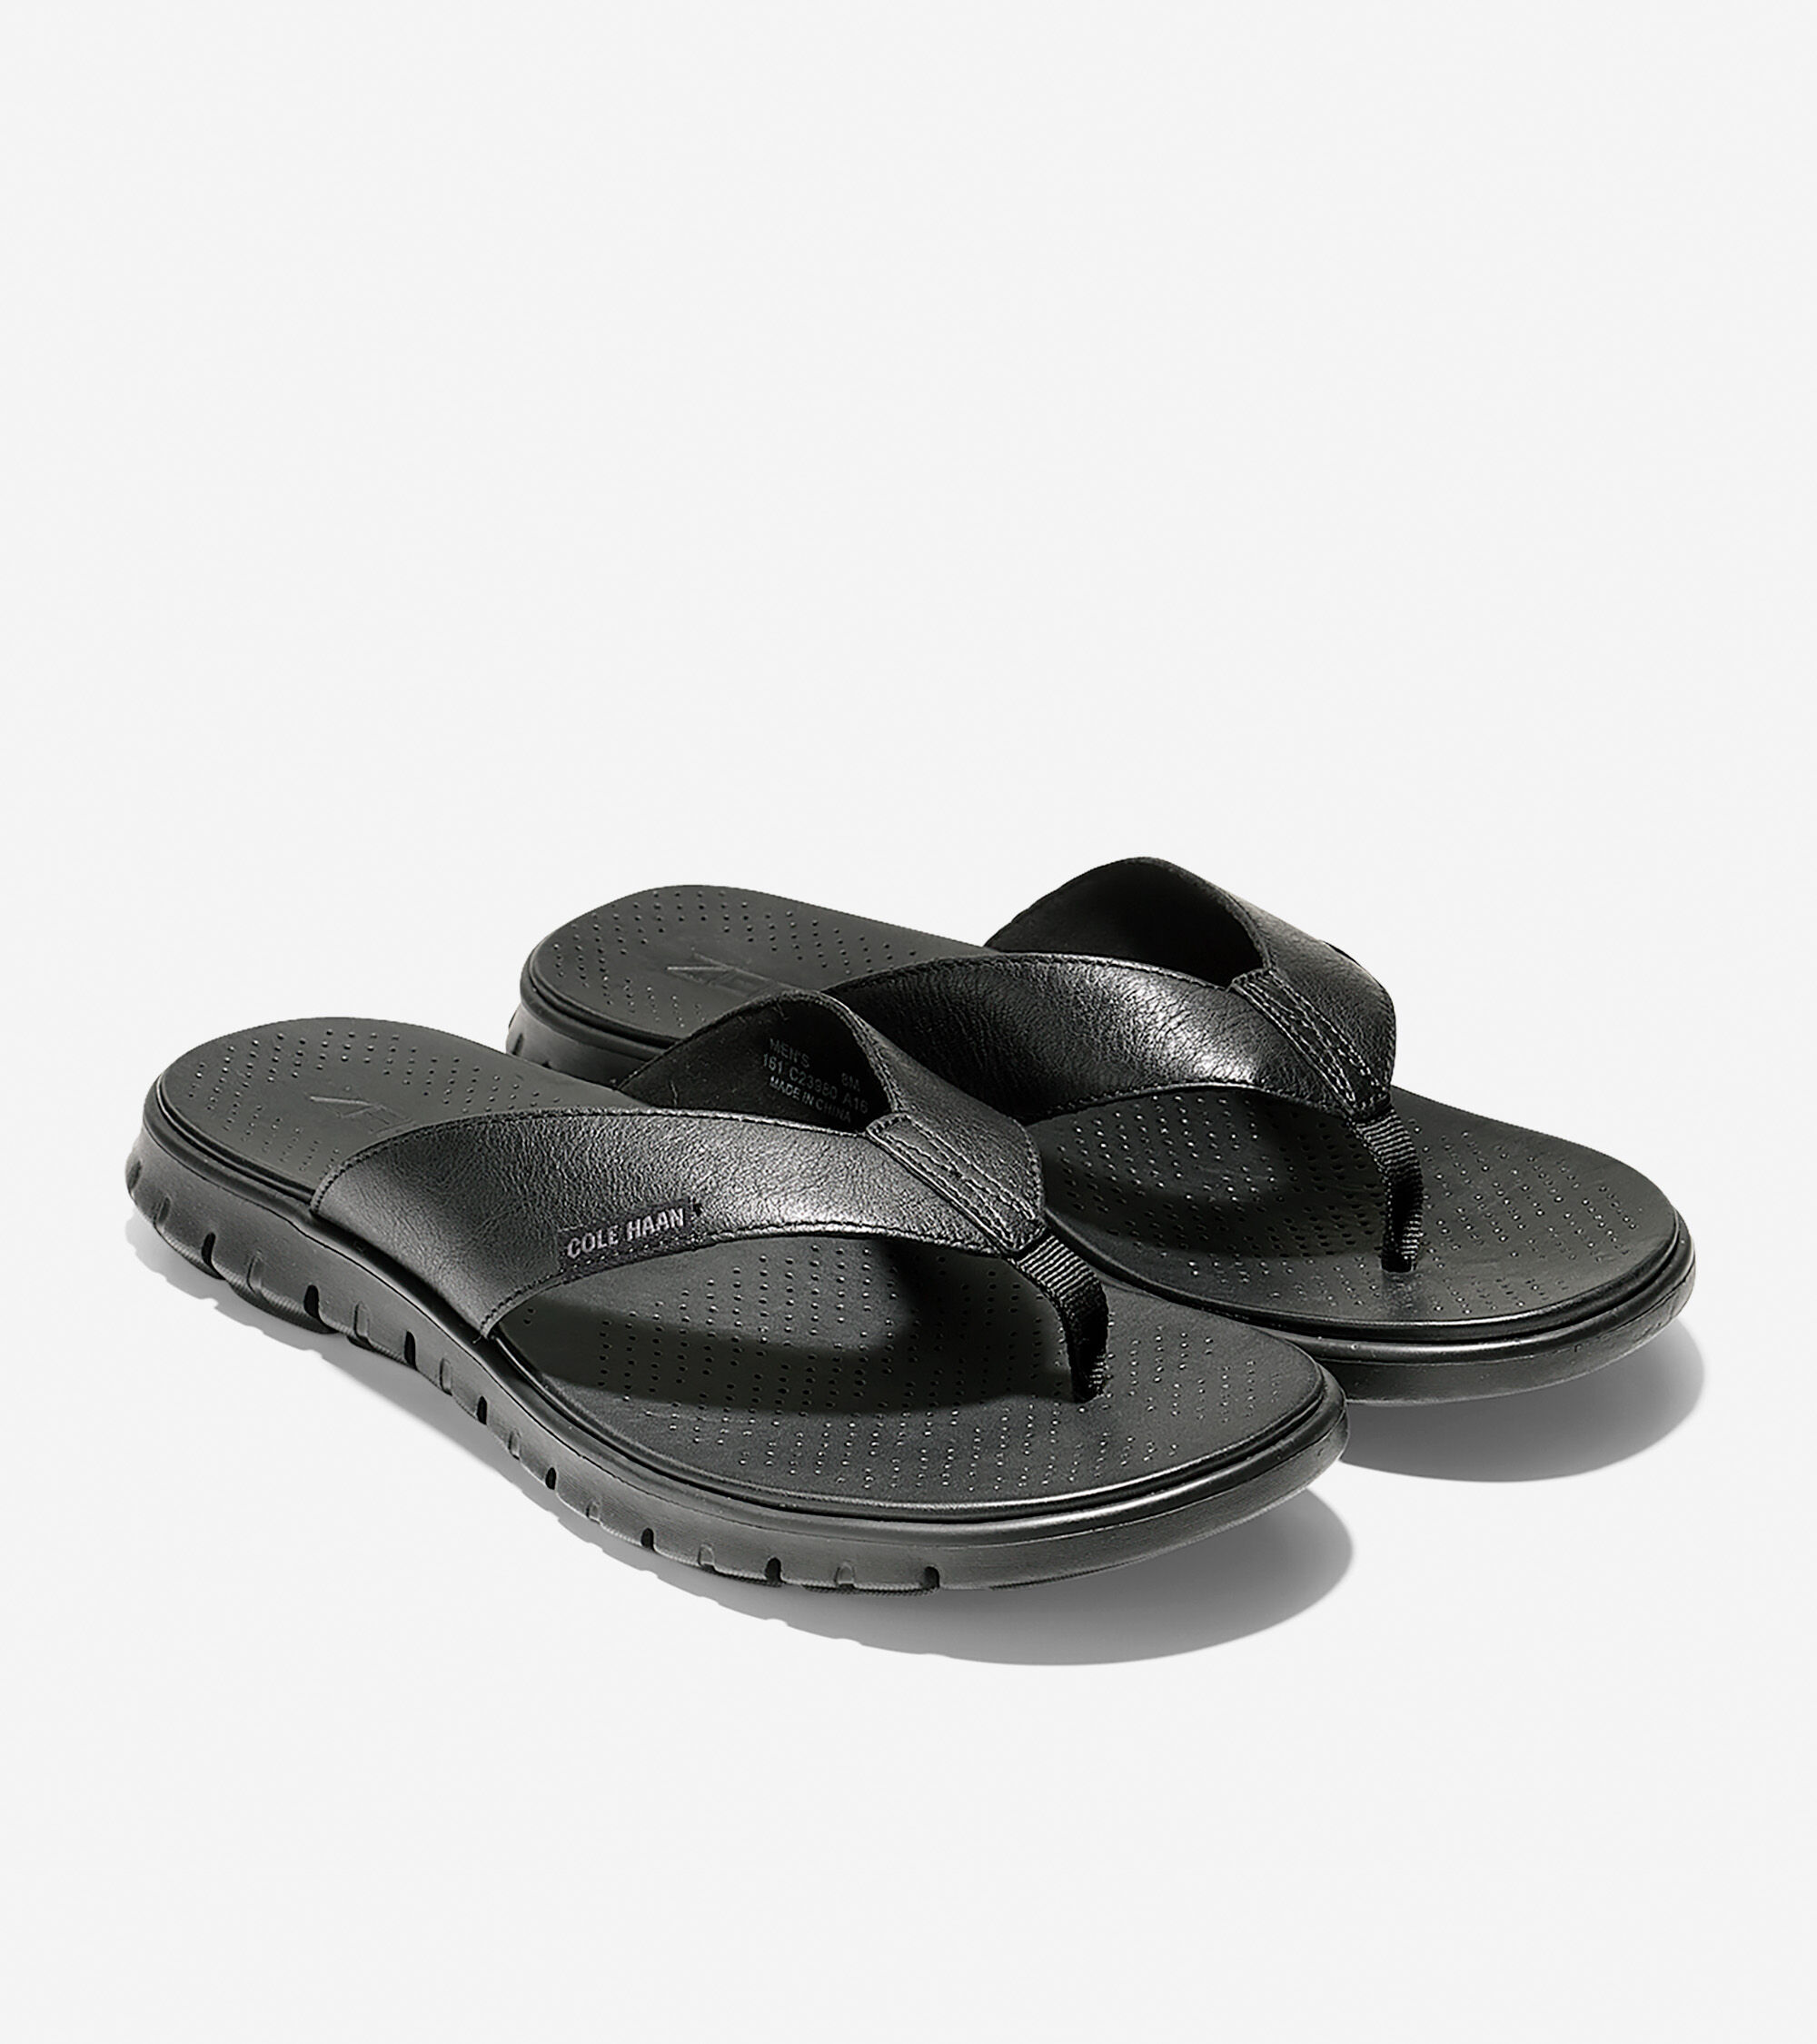 Patent leather flip flops Cole Haan Black size 11 US in Patent leather -  32150800